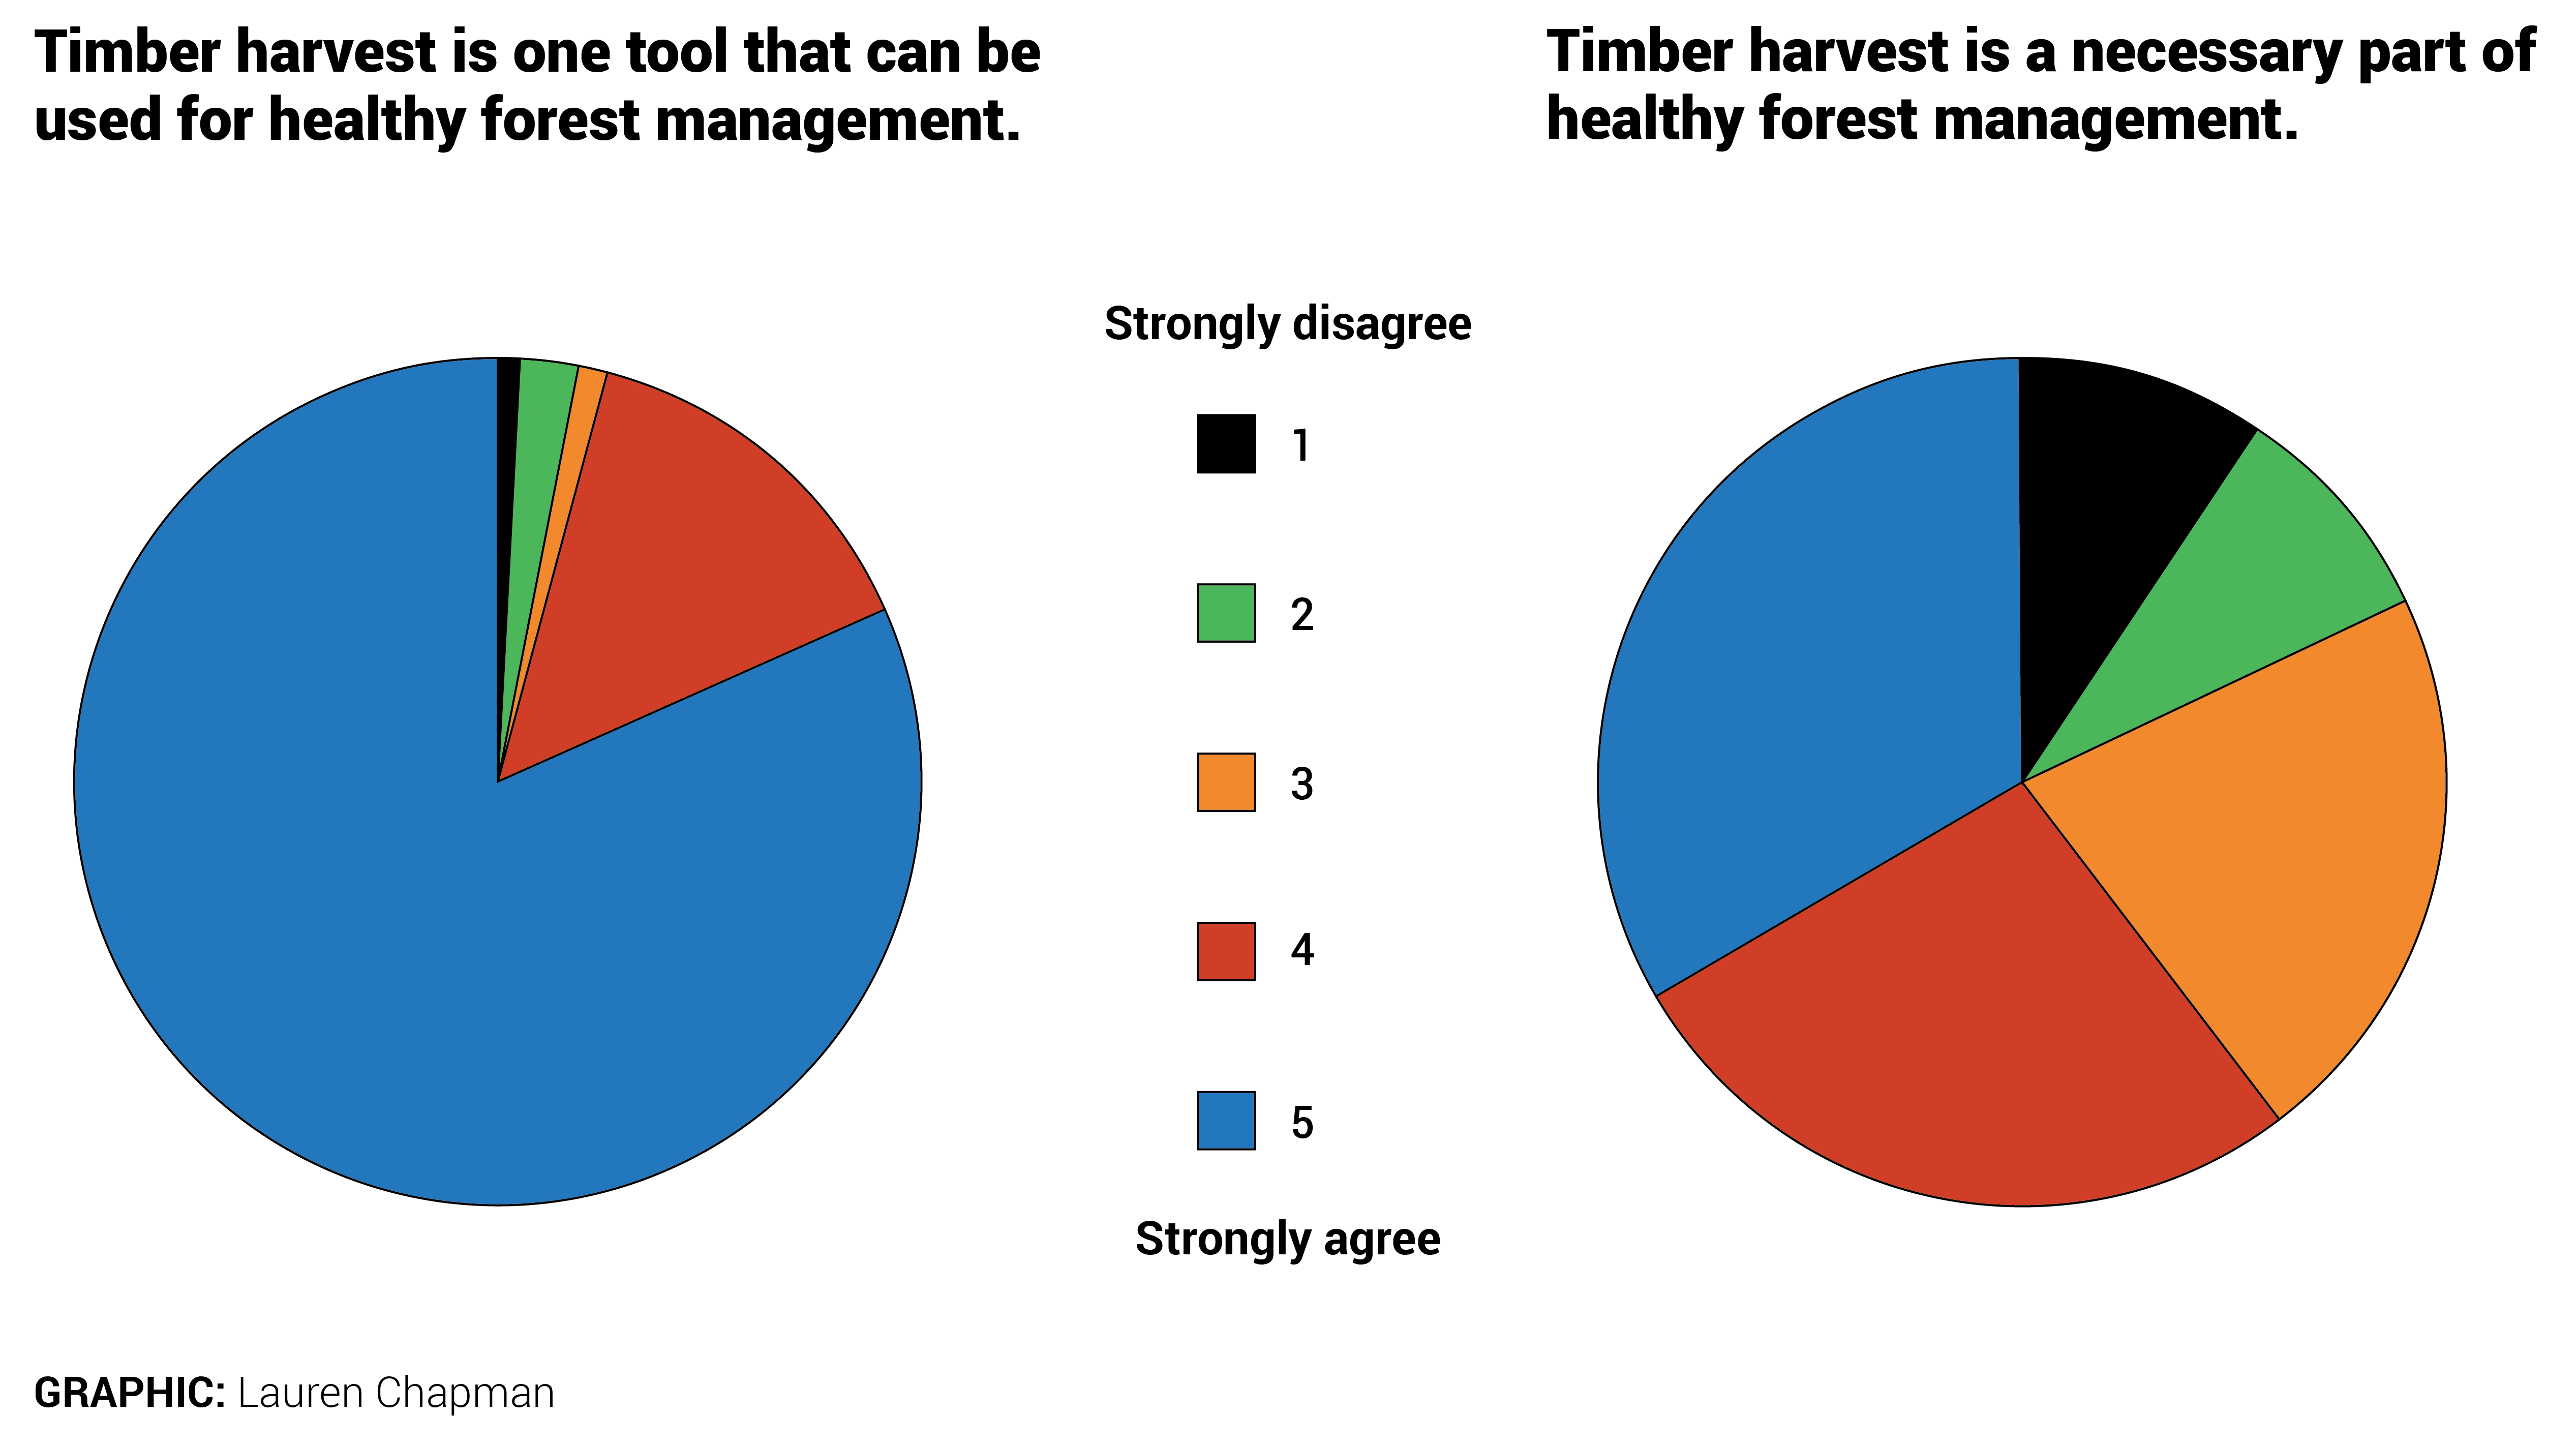 Two pie charts. The first says timber harvest is one tool that can be used for healthy 
    forest management. On a scale of 1 to 5, where 1 is strongly disagree and 5 is strongly agree 1.1 percent said 1. 2.2 percent said 2. 1.1 percent said 3. 
    14 percent said 4. And 81.7 percent said 5. The second pie chart says timber harvest is a necessary part of healthy forest management. On a scale of 1 to 5, 
    where 1 is strongly disagree and 5 is strongly agree, 9.7 percent said 1. 8.6 percent said 2. 21.5 percent said 3. 26.9 percent said 4. And 33.3 percent said 5.